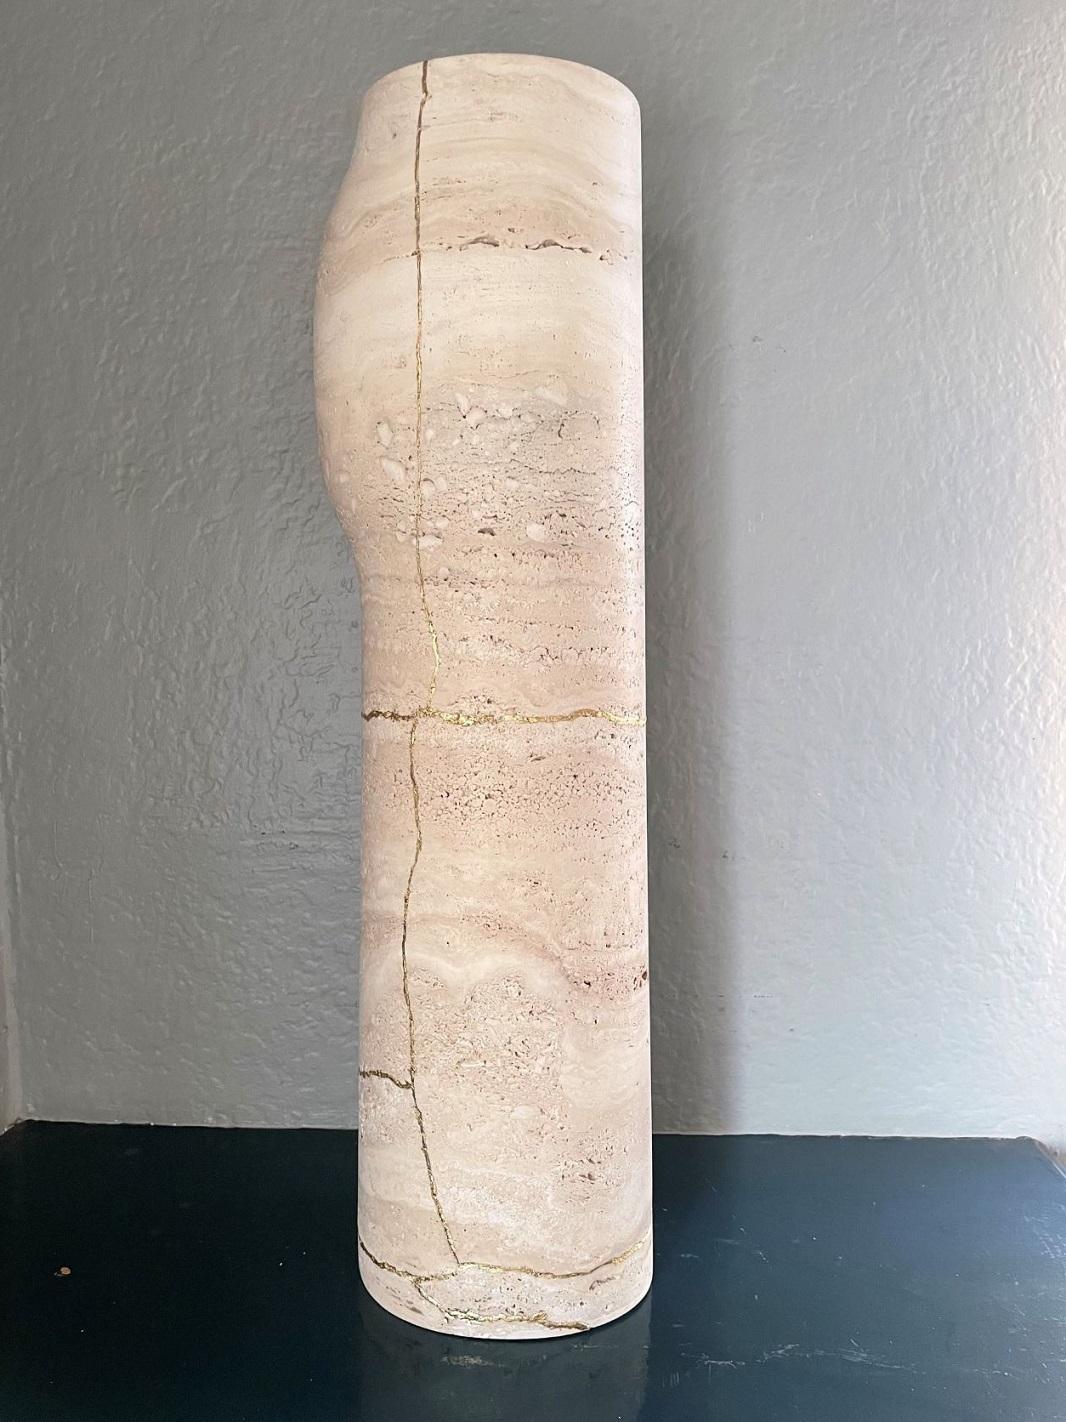 Absolutely beautiful and rare Roman Travertine vase by famed designer Christophe Delcourt for Collection Particuliere. Sculpted from the finest travertine found in Italian quarries; tall column vase with distinct protruding bulge towards the top